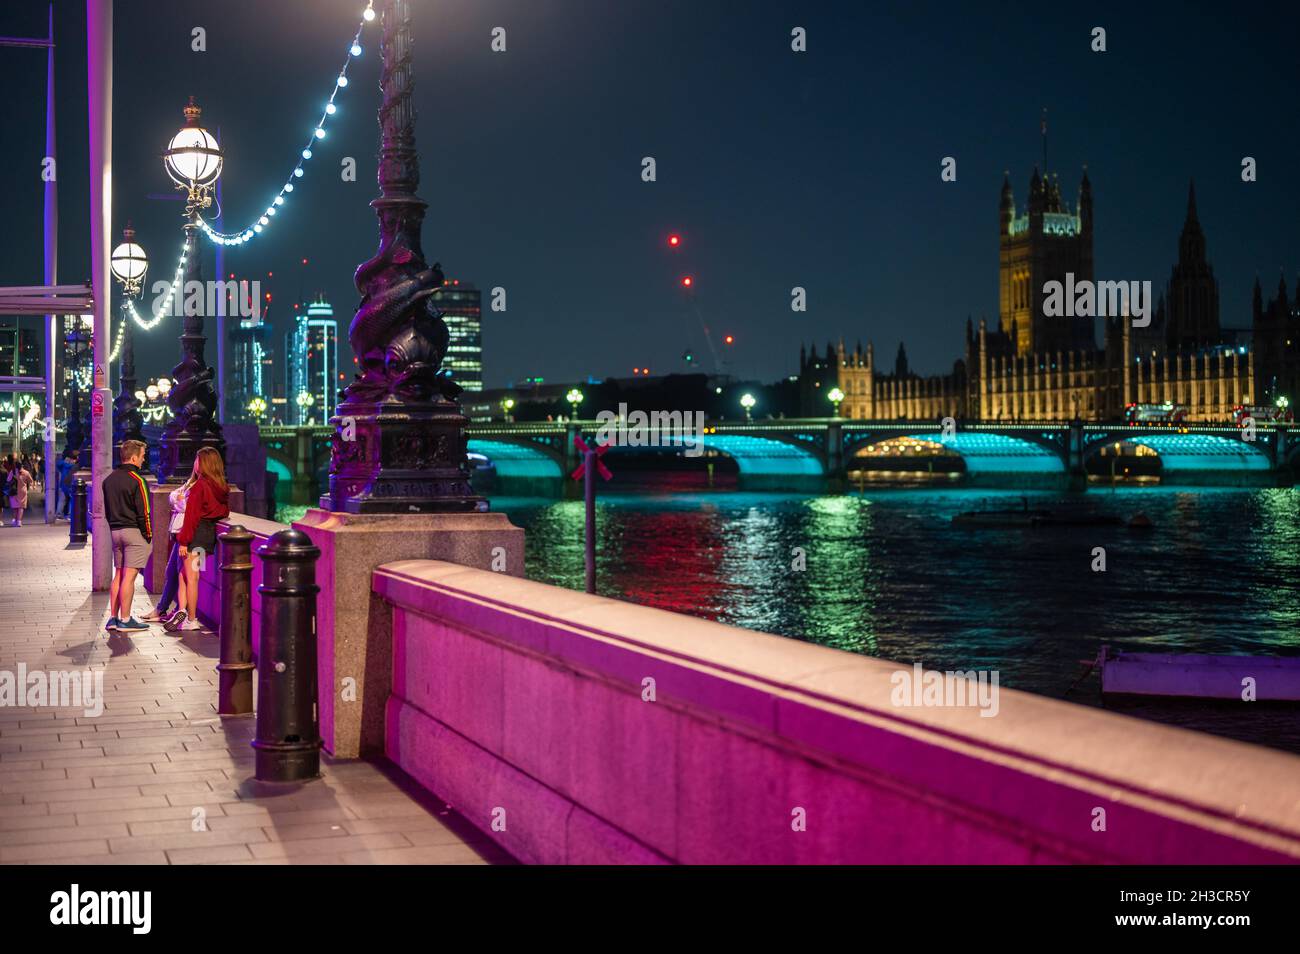 LONDON - SEPTEMBER 14, 2021: Colourfully lit night scene on The Queen's Walk, Southbank outside County Hall. Westminster Bridge and The Houses of Parl Stock Photo